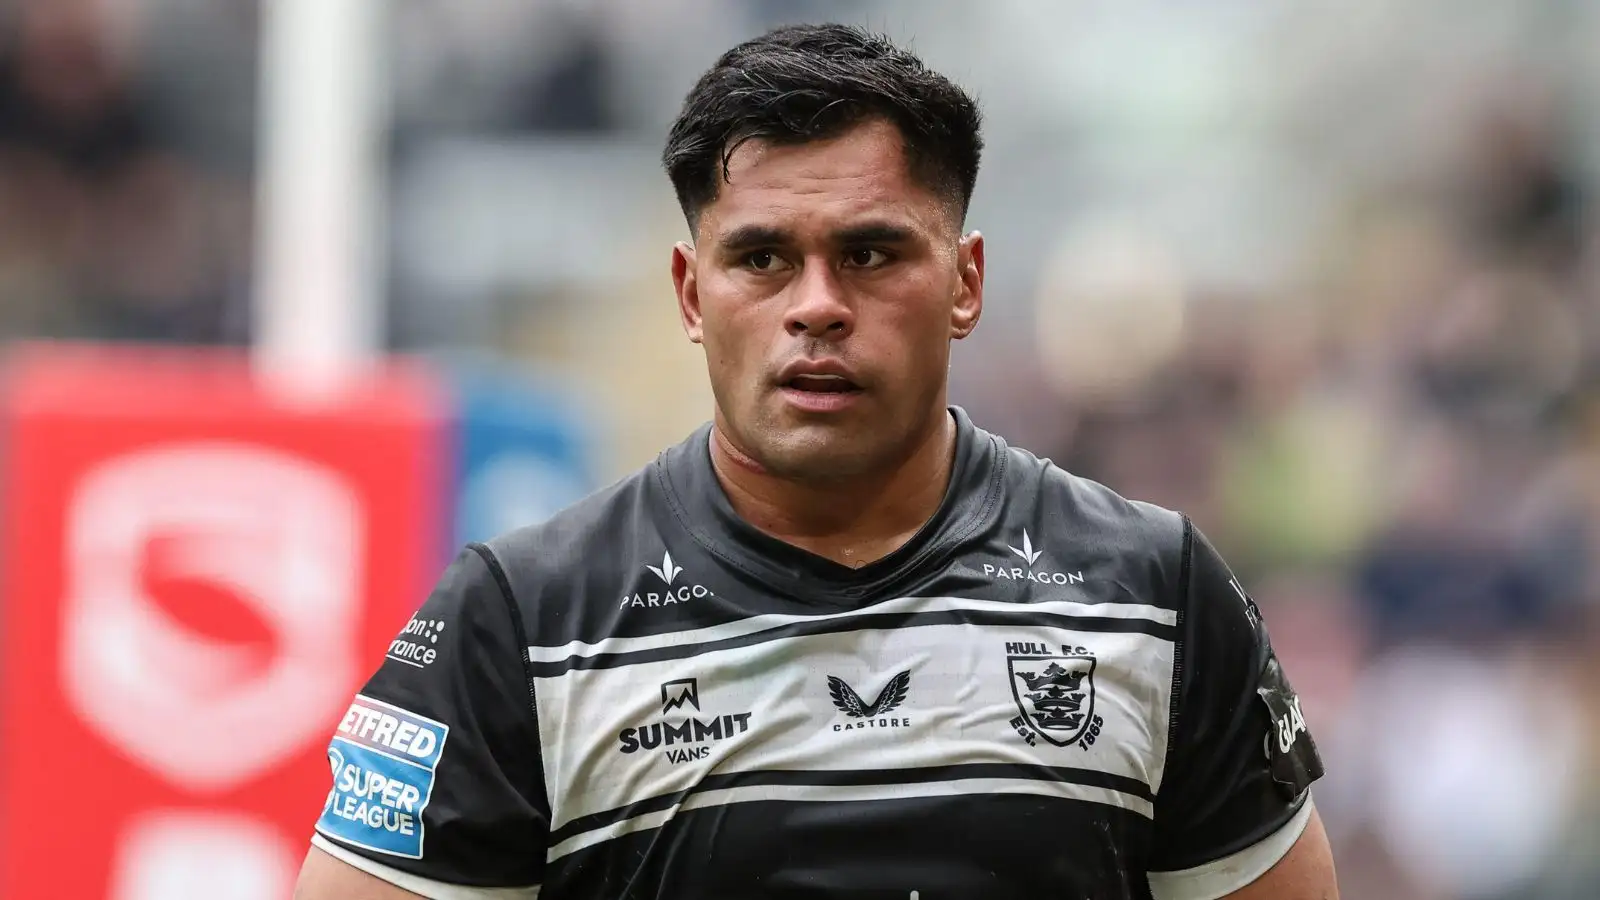 Hull FC prop to be investigated over London Broncos verbal abuse allegation